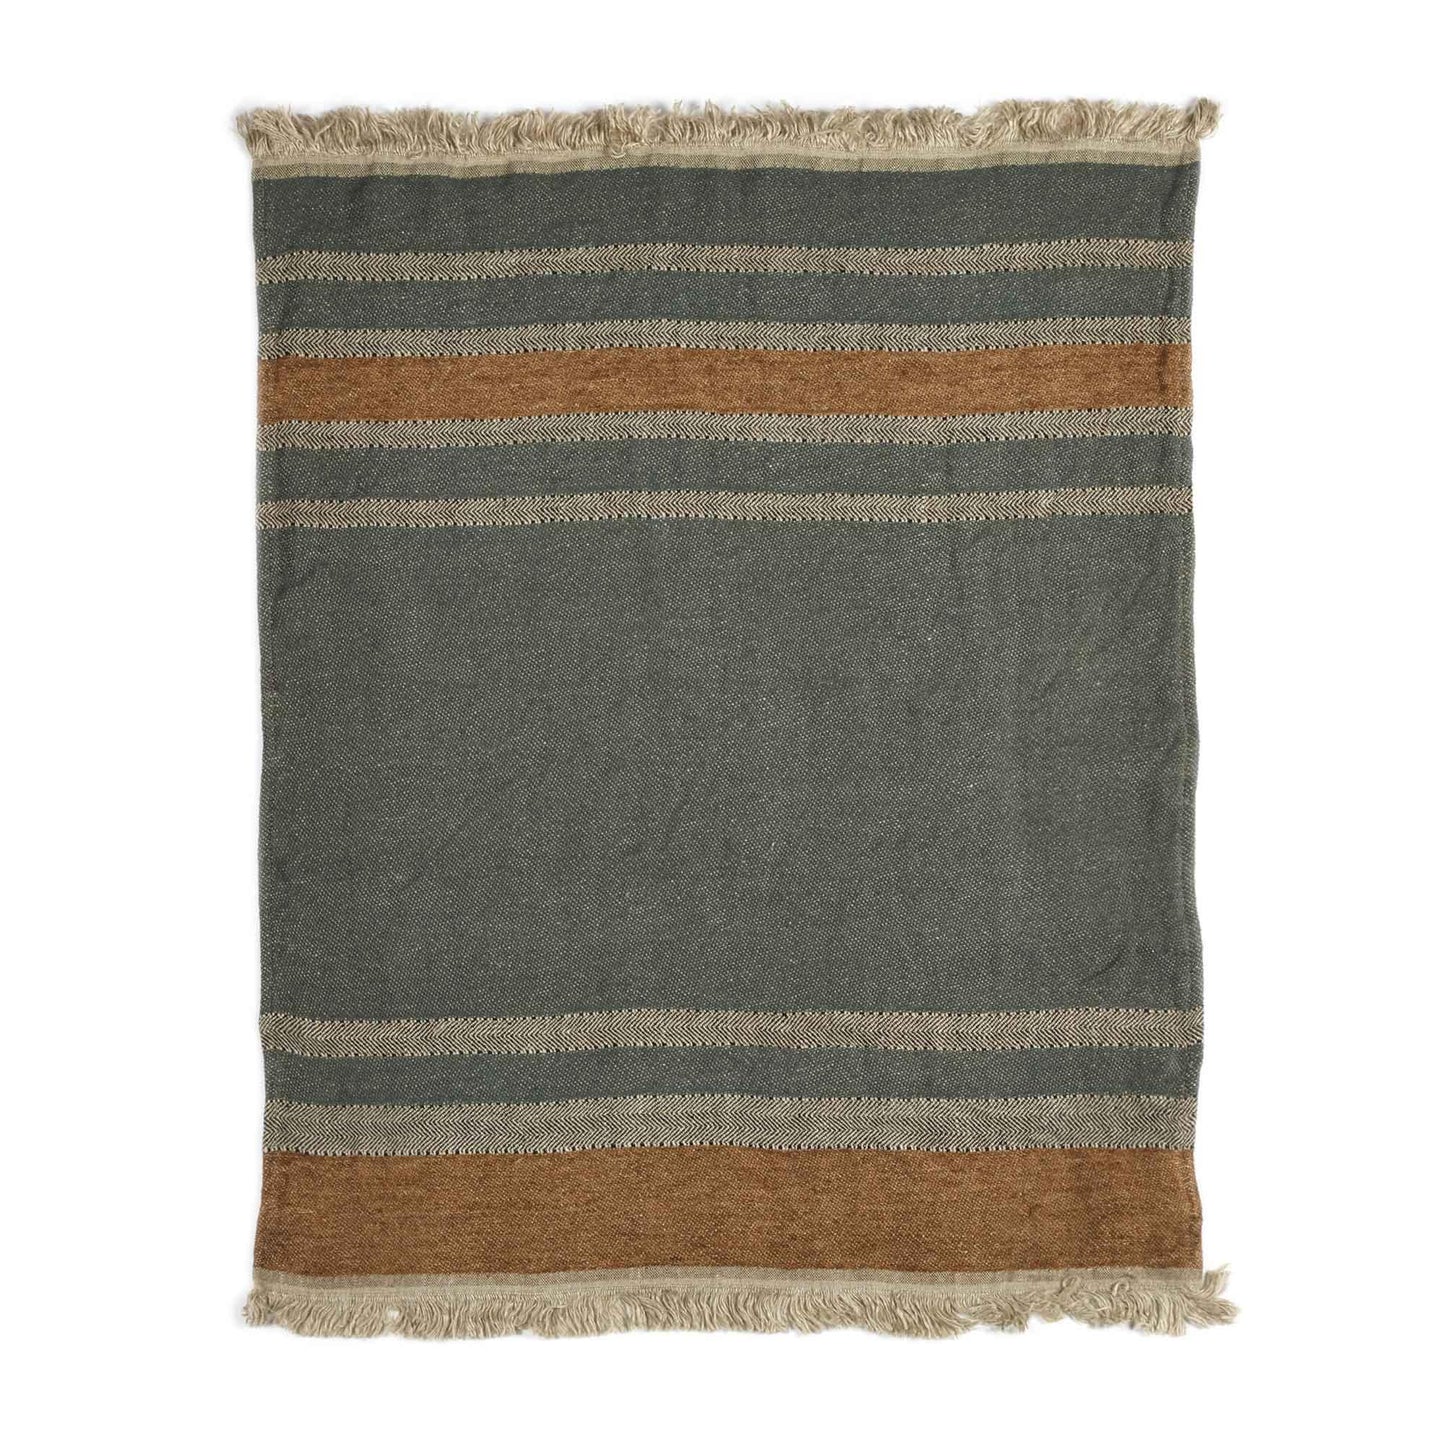 Belgian linen fouta throw blanket flat lay product shot in color Alouette by Libeco for South Hous.